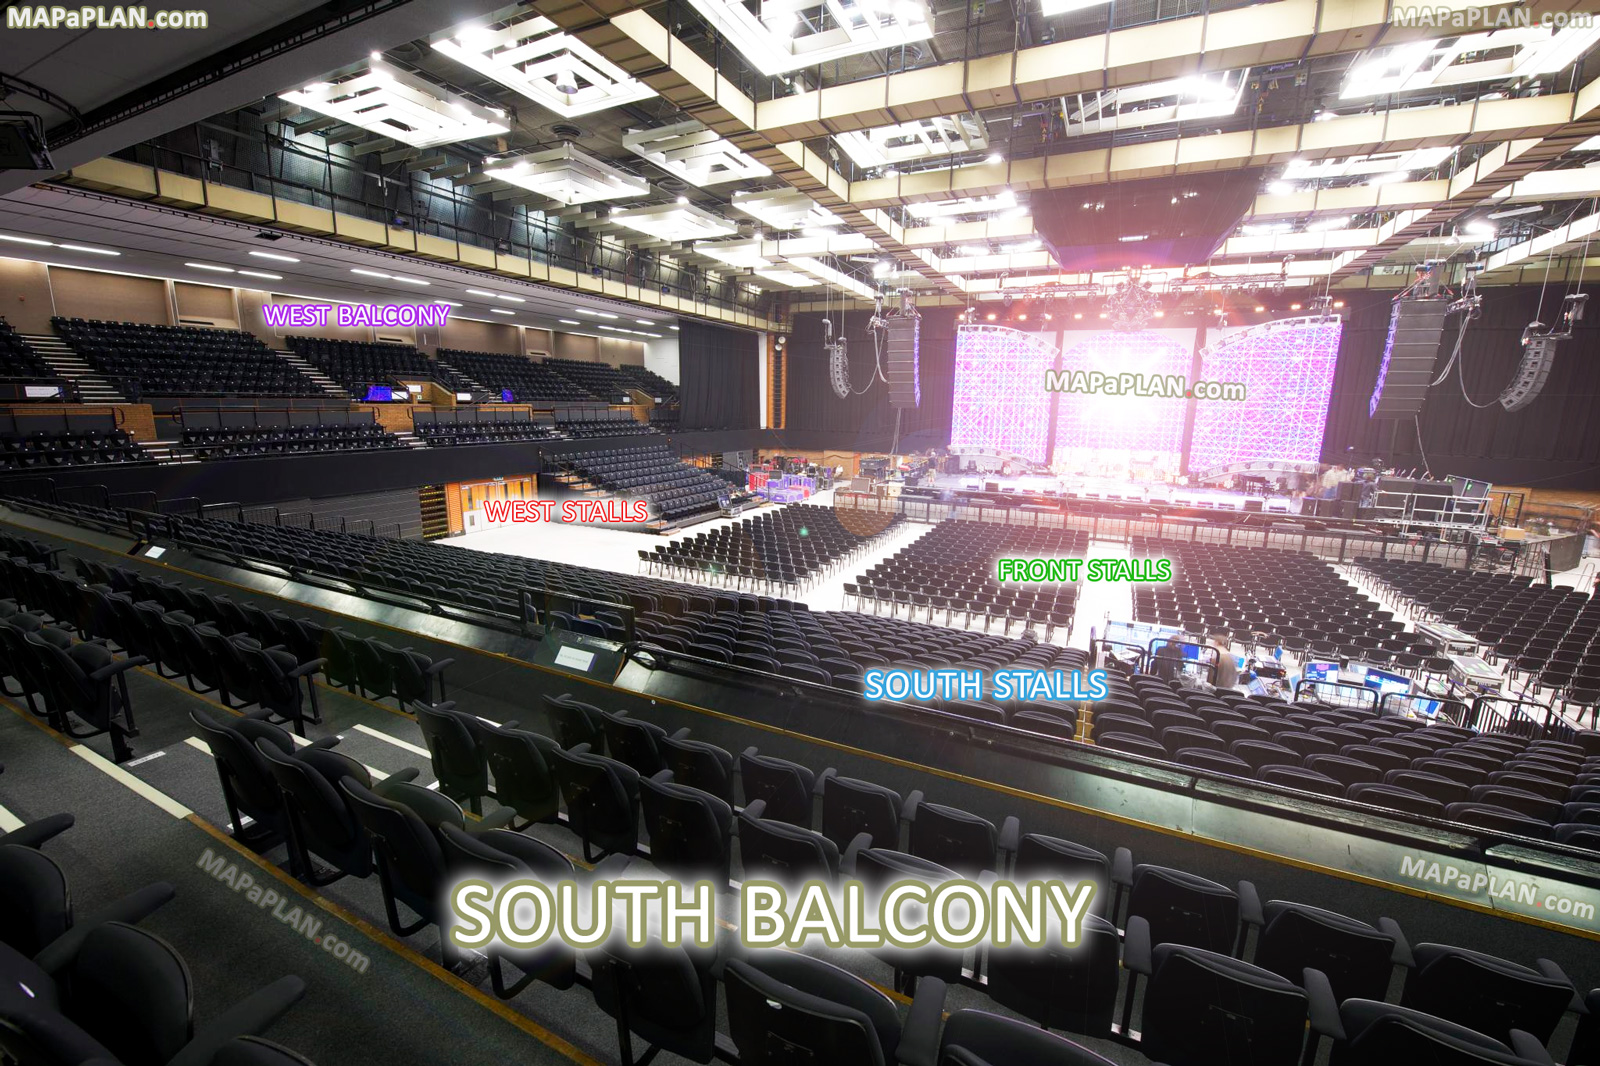 Brighton Centre - Best seats layout - View from my seat - South Balcony